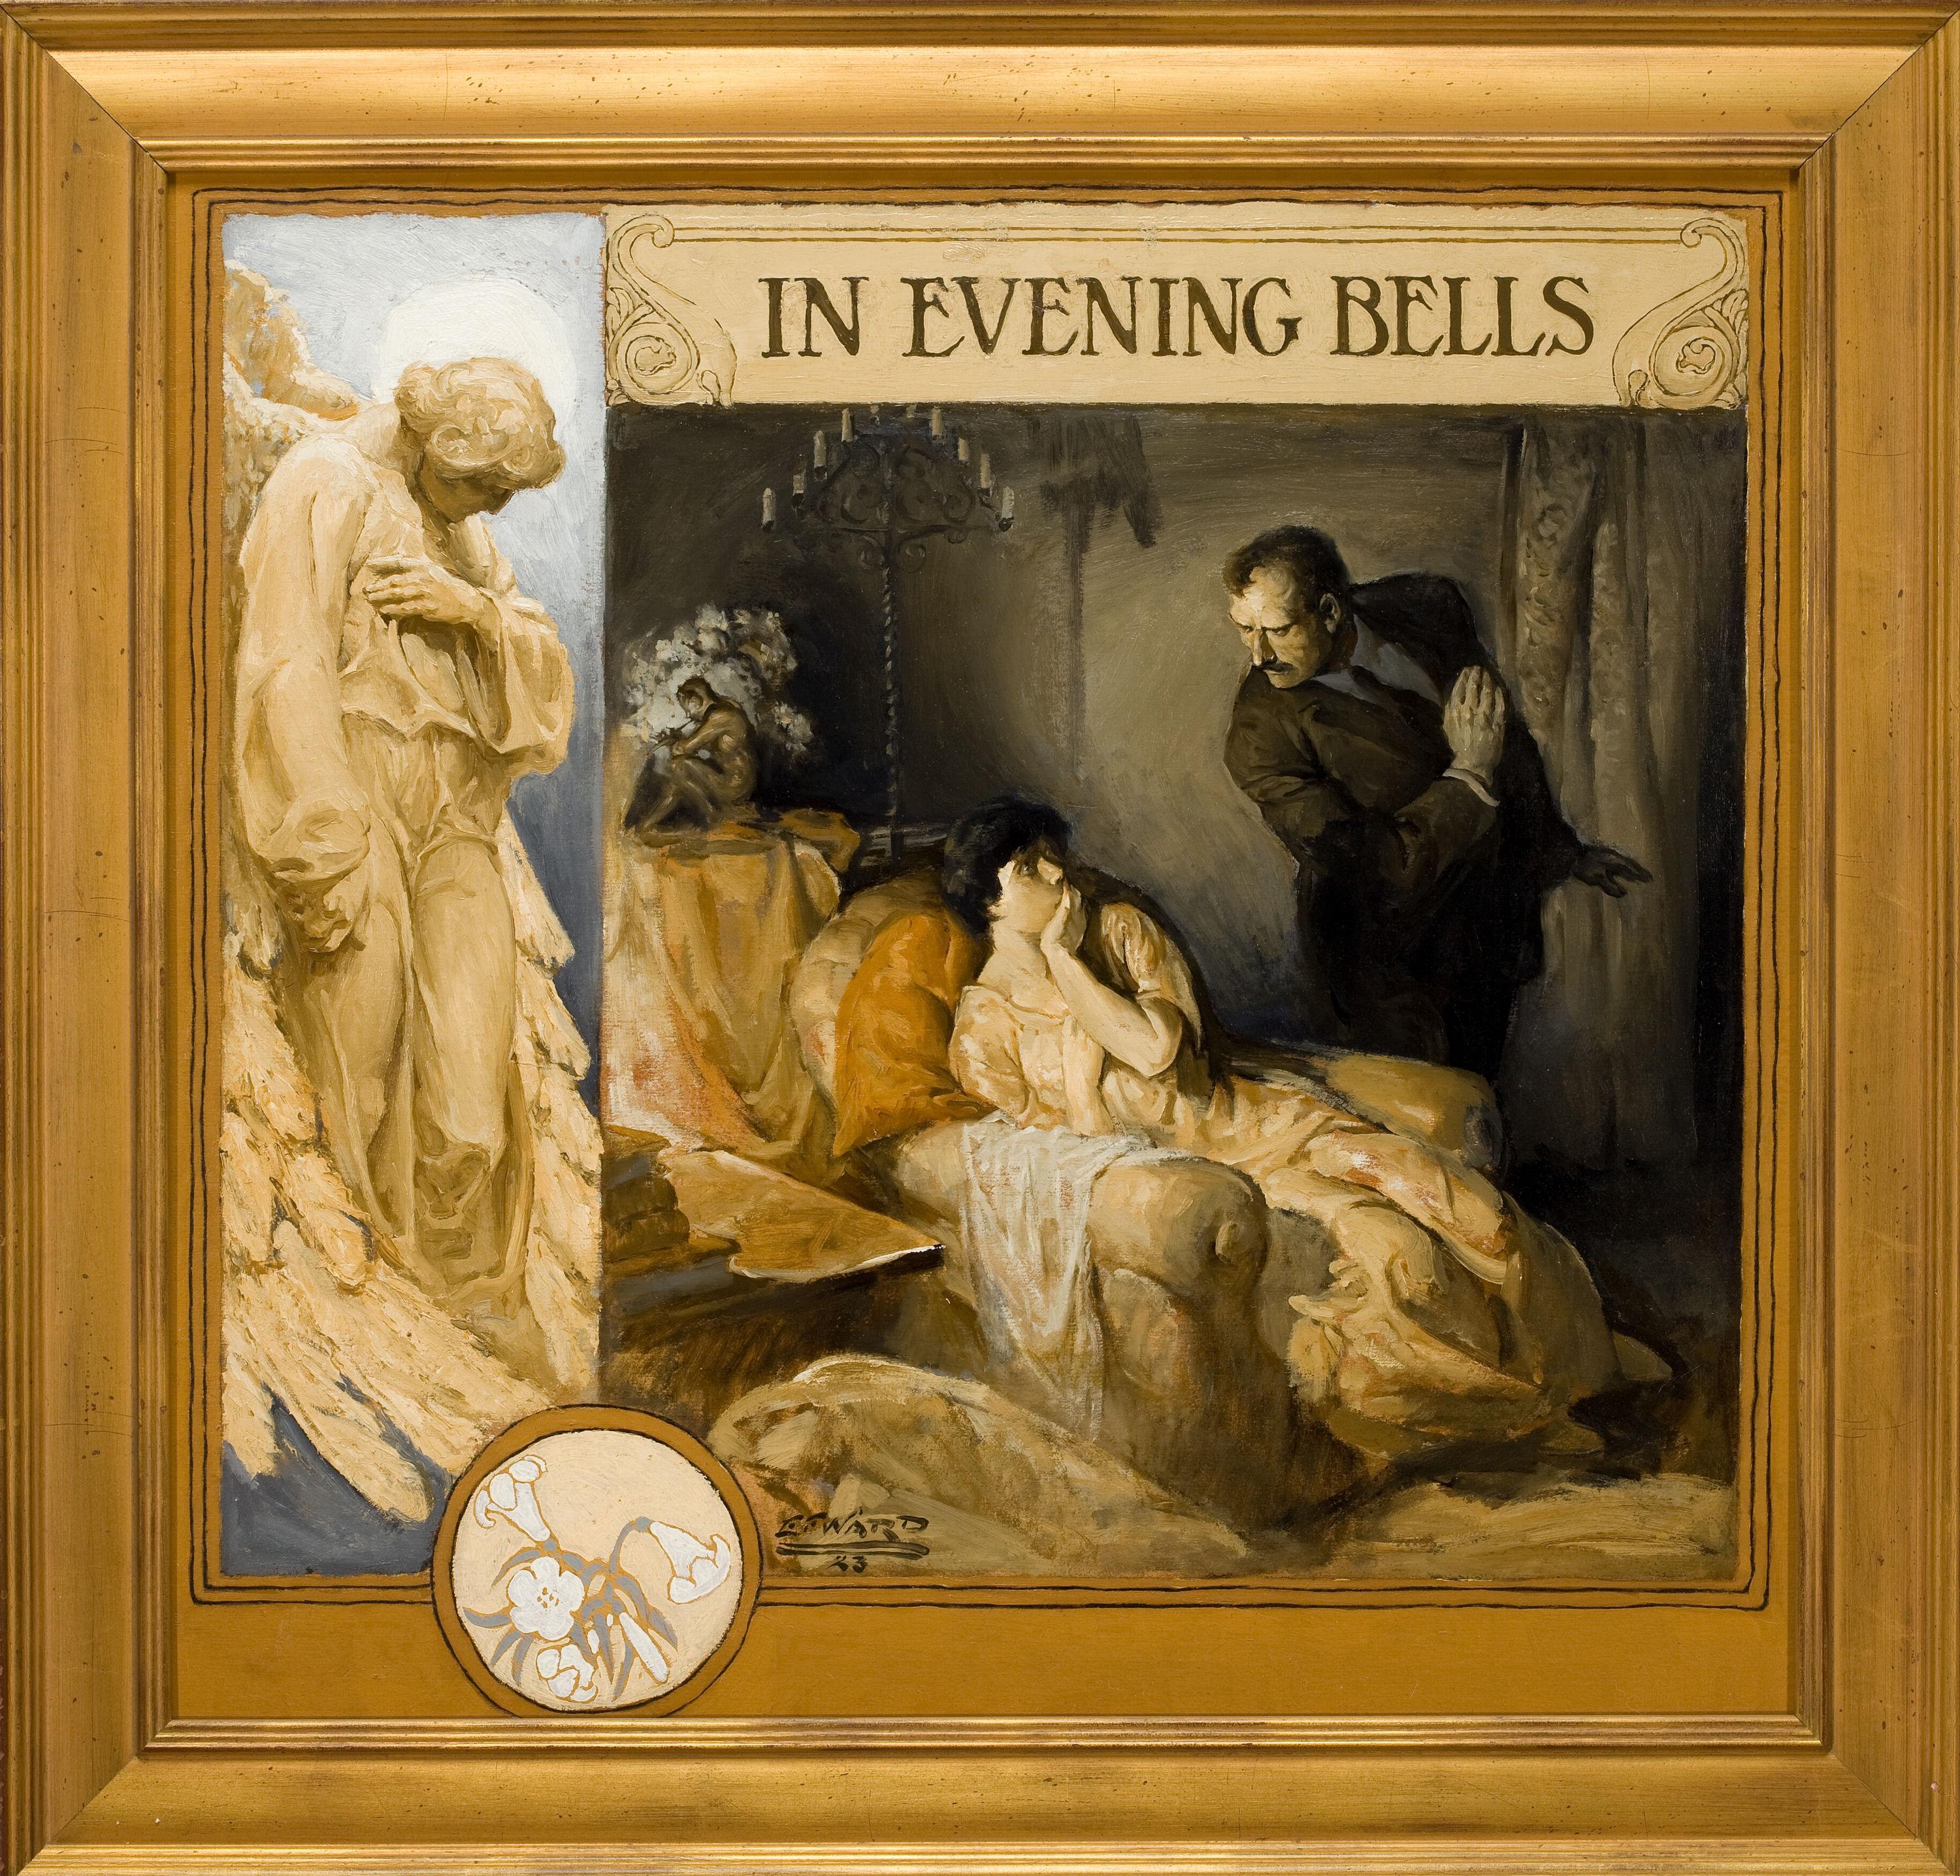 In Evening Bells, Front Book Cover - Painting by Edmund Ward